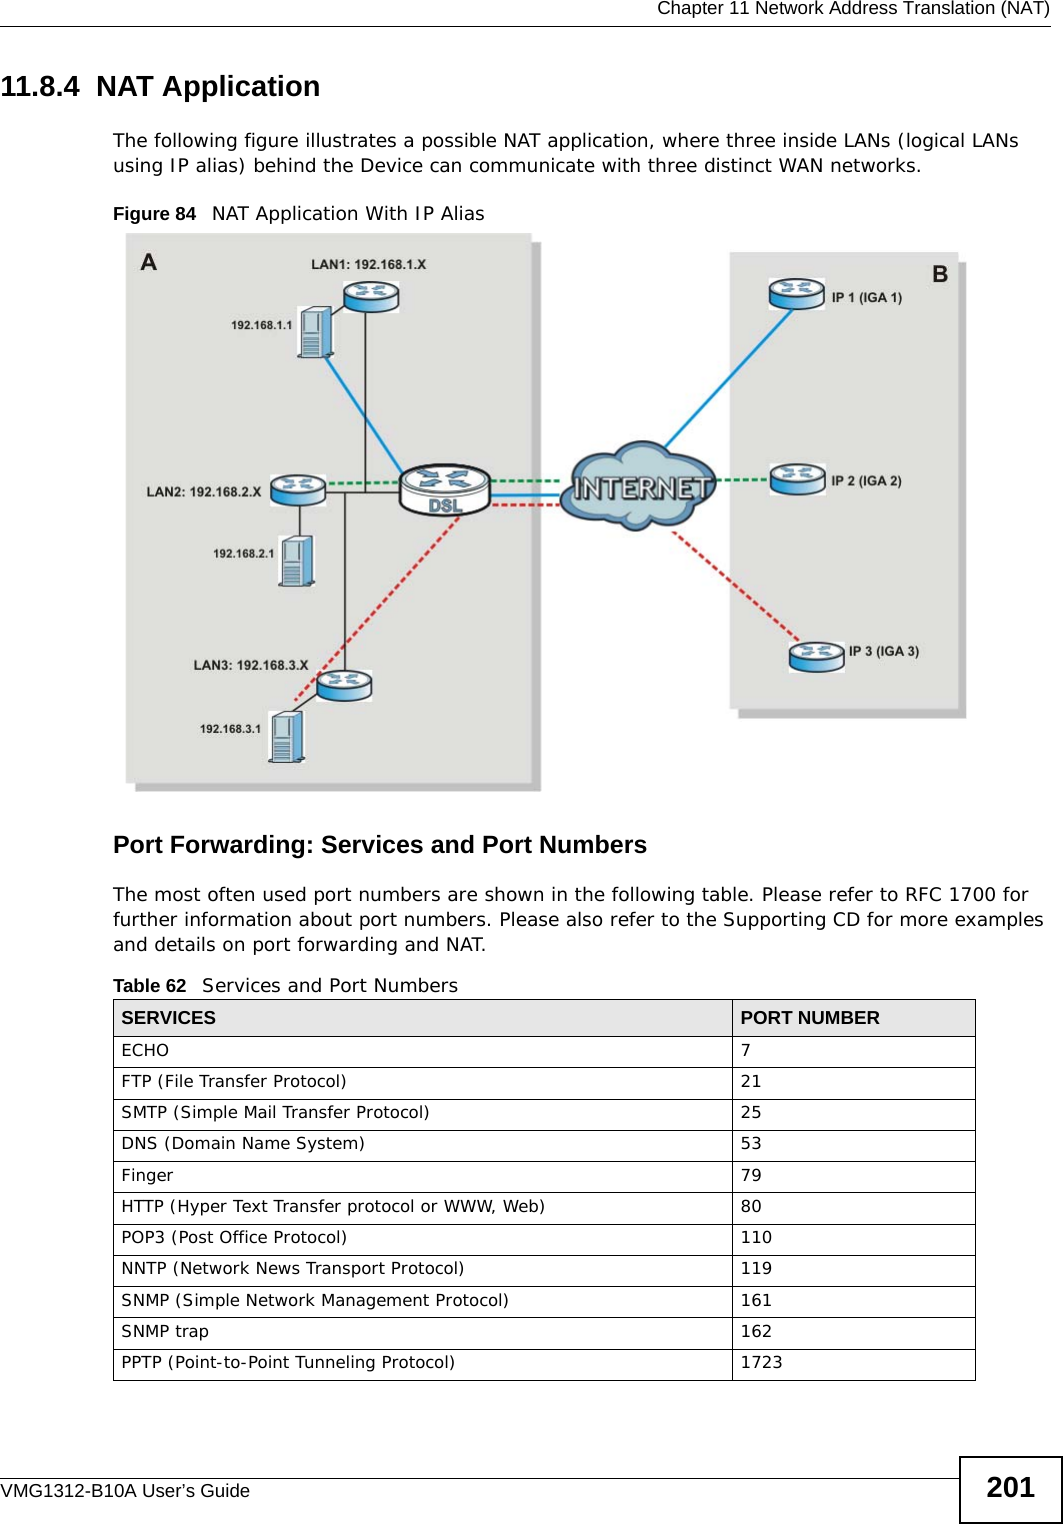  Chapter 11 Network Address Translation (NAT)VMG1312-B10A User’s Guide 20111.8.4  NAT ApplicationThe following figure illustrates a possible NAT application, where three inside LANs (logical LANs using IP alias) behind the Device can communicate with three distinct WAN networks.Figure 84   NAT Application With IP AliasPort Forwarding: Services and Port NumbersThe most often used port numbers are shown in the following table. Please refer to RFC 1700 for further information about port numbers. Please also refer to the Supporting CD for more examples and details on port forwarding and NAT.Table 62   Services and Port NumbersSERVICES PORT NUMBERECHO 7FTP (File Transfer Protocol) 21SMTP (Simple Mail Transfer Protocol) 25DNS (Domain Name System) 53Finger 79HTTP (Hyper Text Transfer protocol or WWW, Web) 80POP3 (Post Office Protocol) 110NNTP (Network News Transport Protocol) 119SNMP (Simple Network Management Protocol) 161SNMP trap 162PPTP (Point-to-Point Tunneling Protocol) 1723